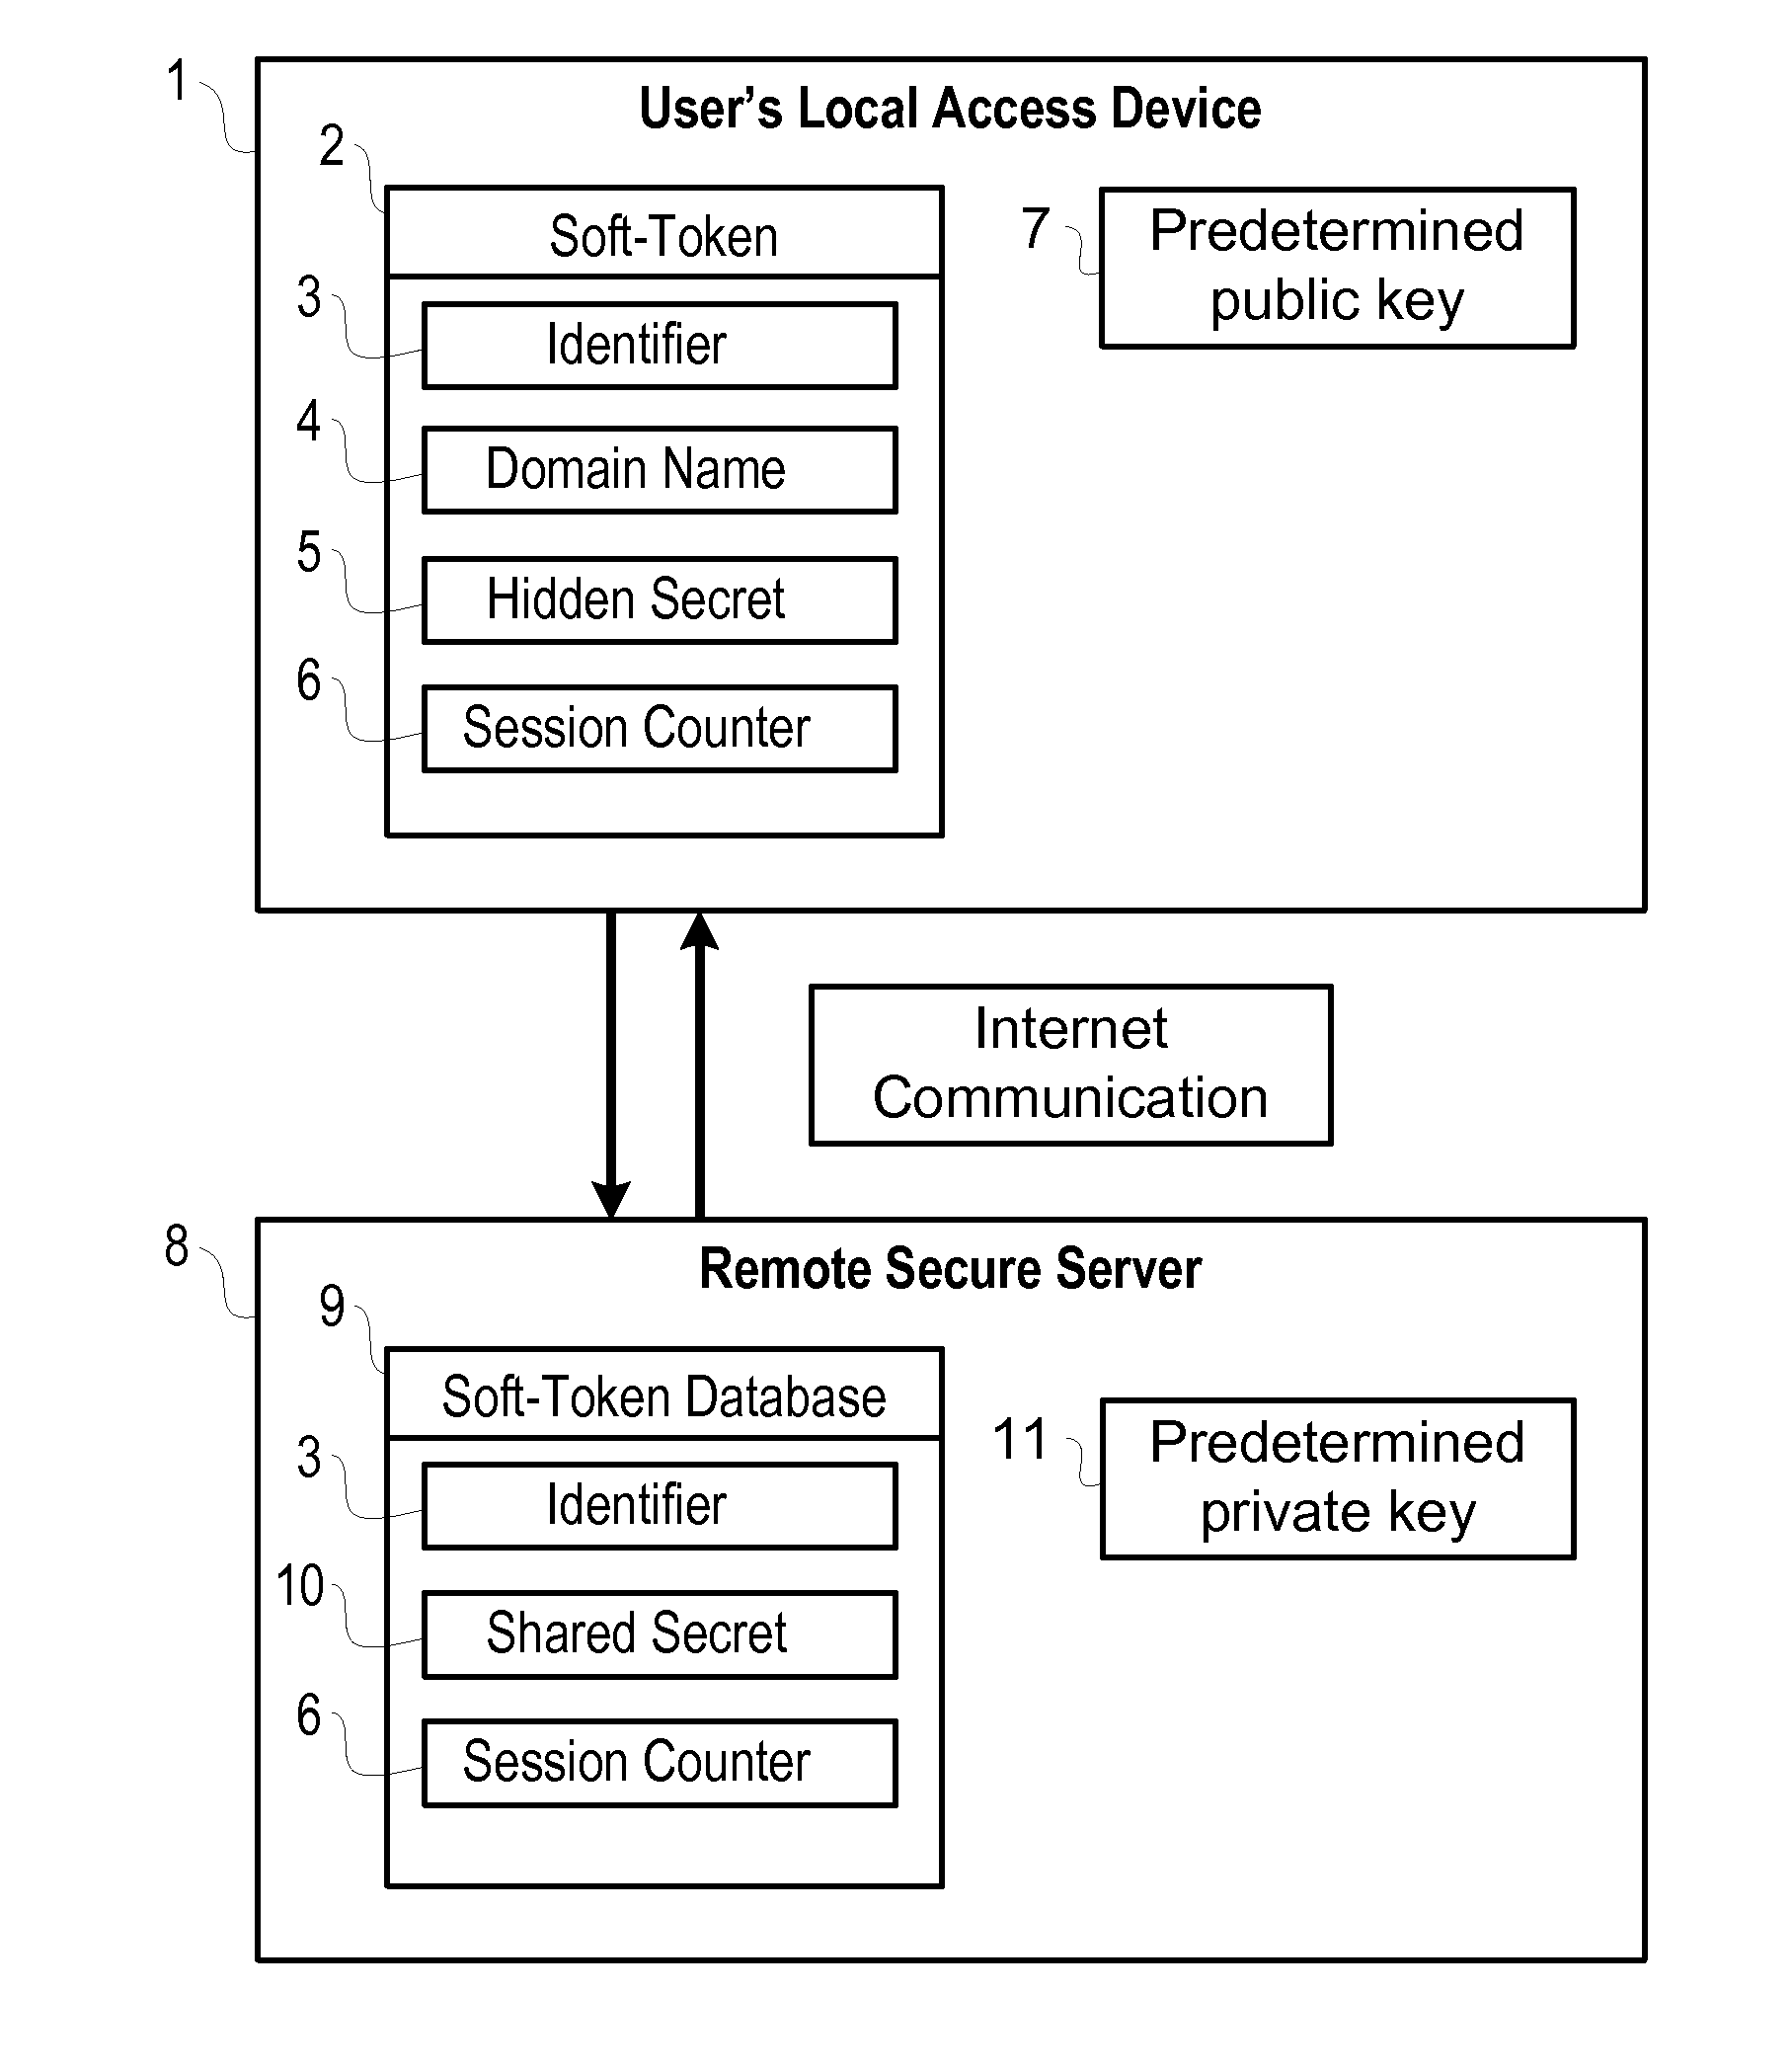 Soft-Token Authentication System